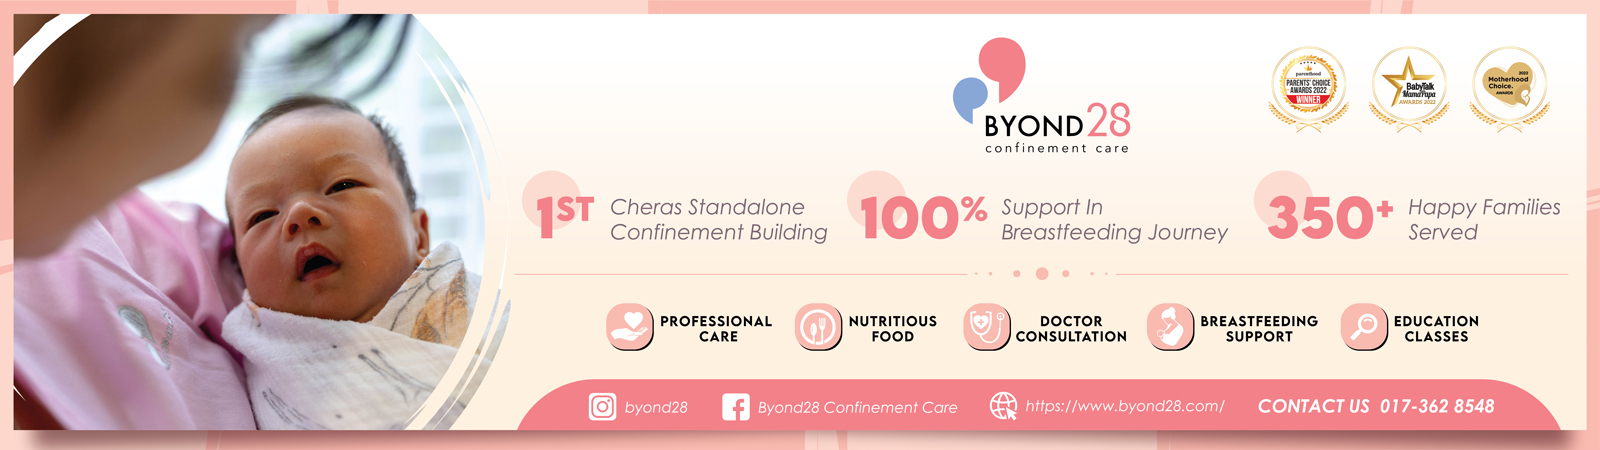 Quality Postpartum Confinement with Byond28